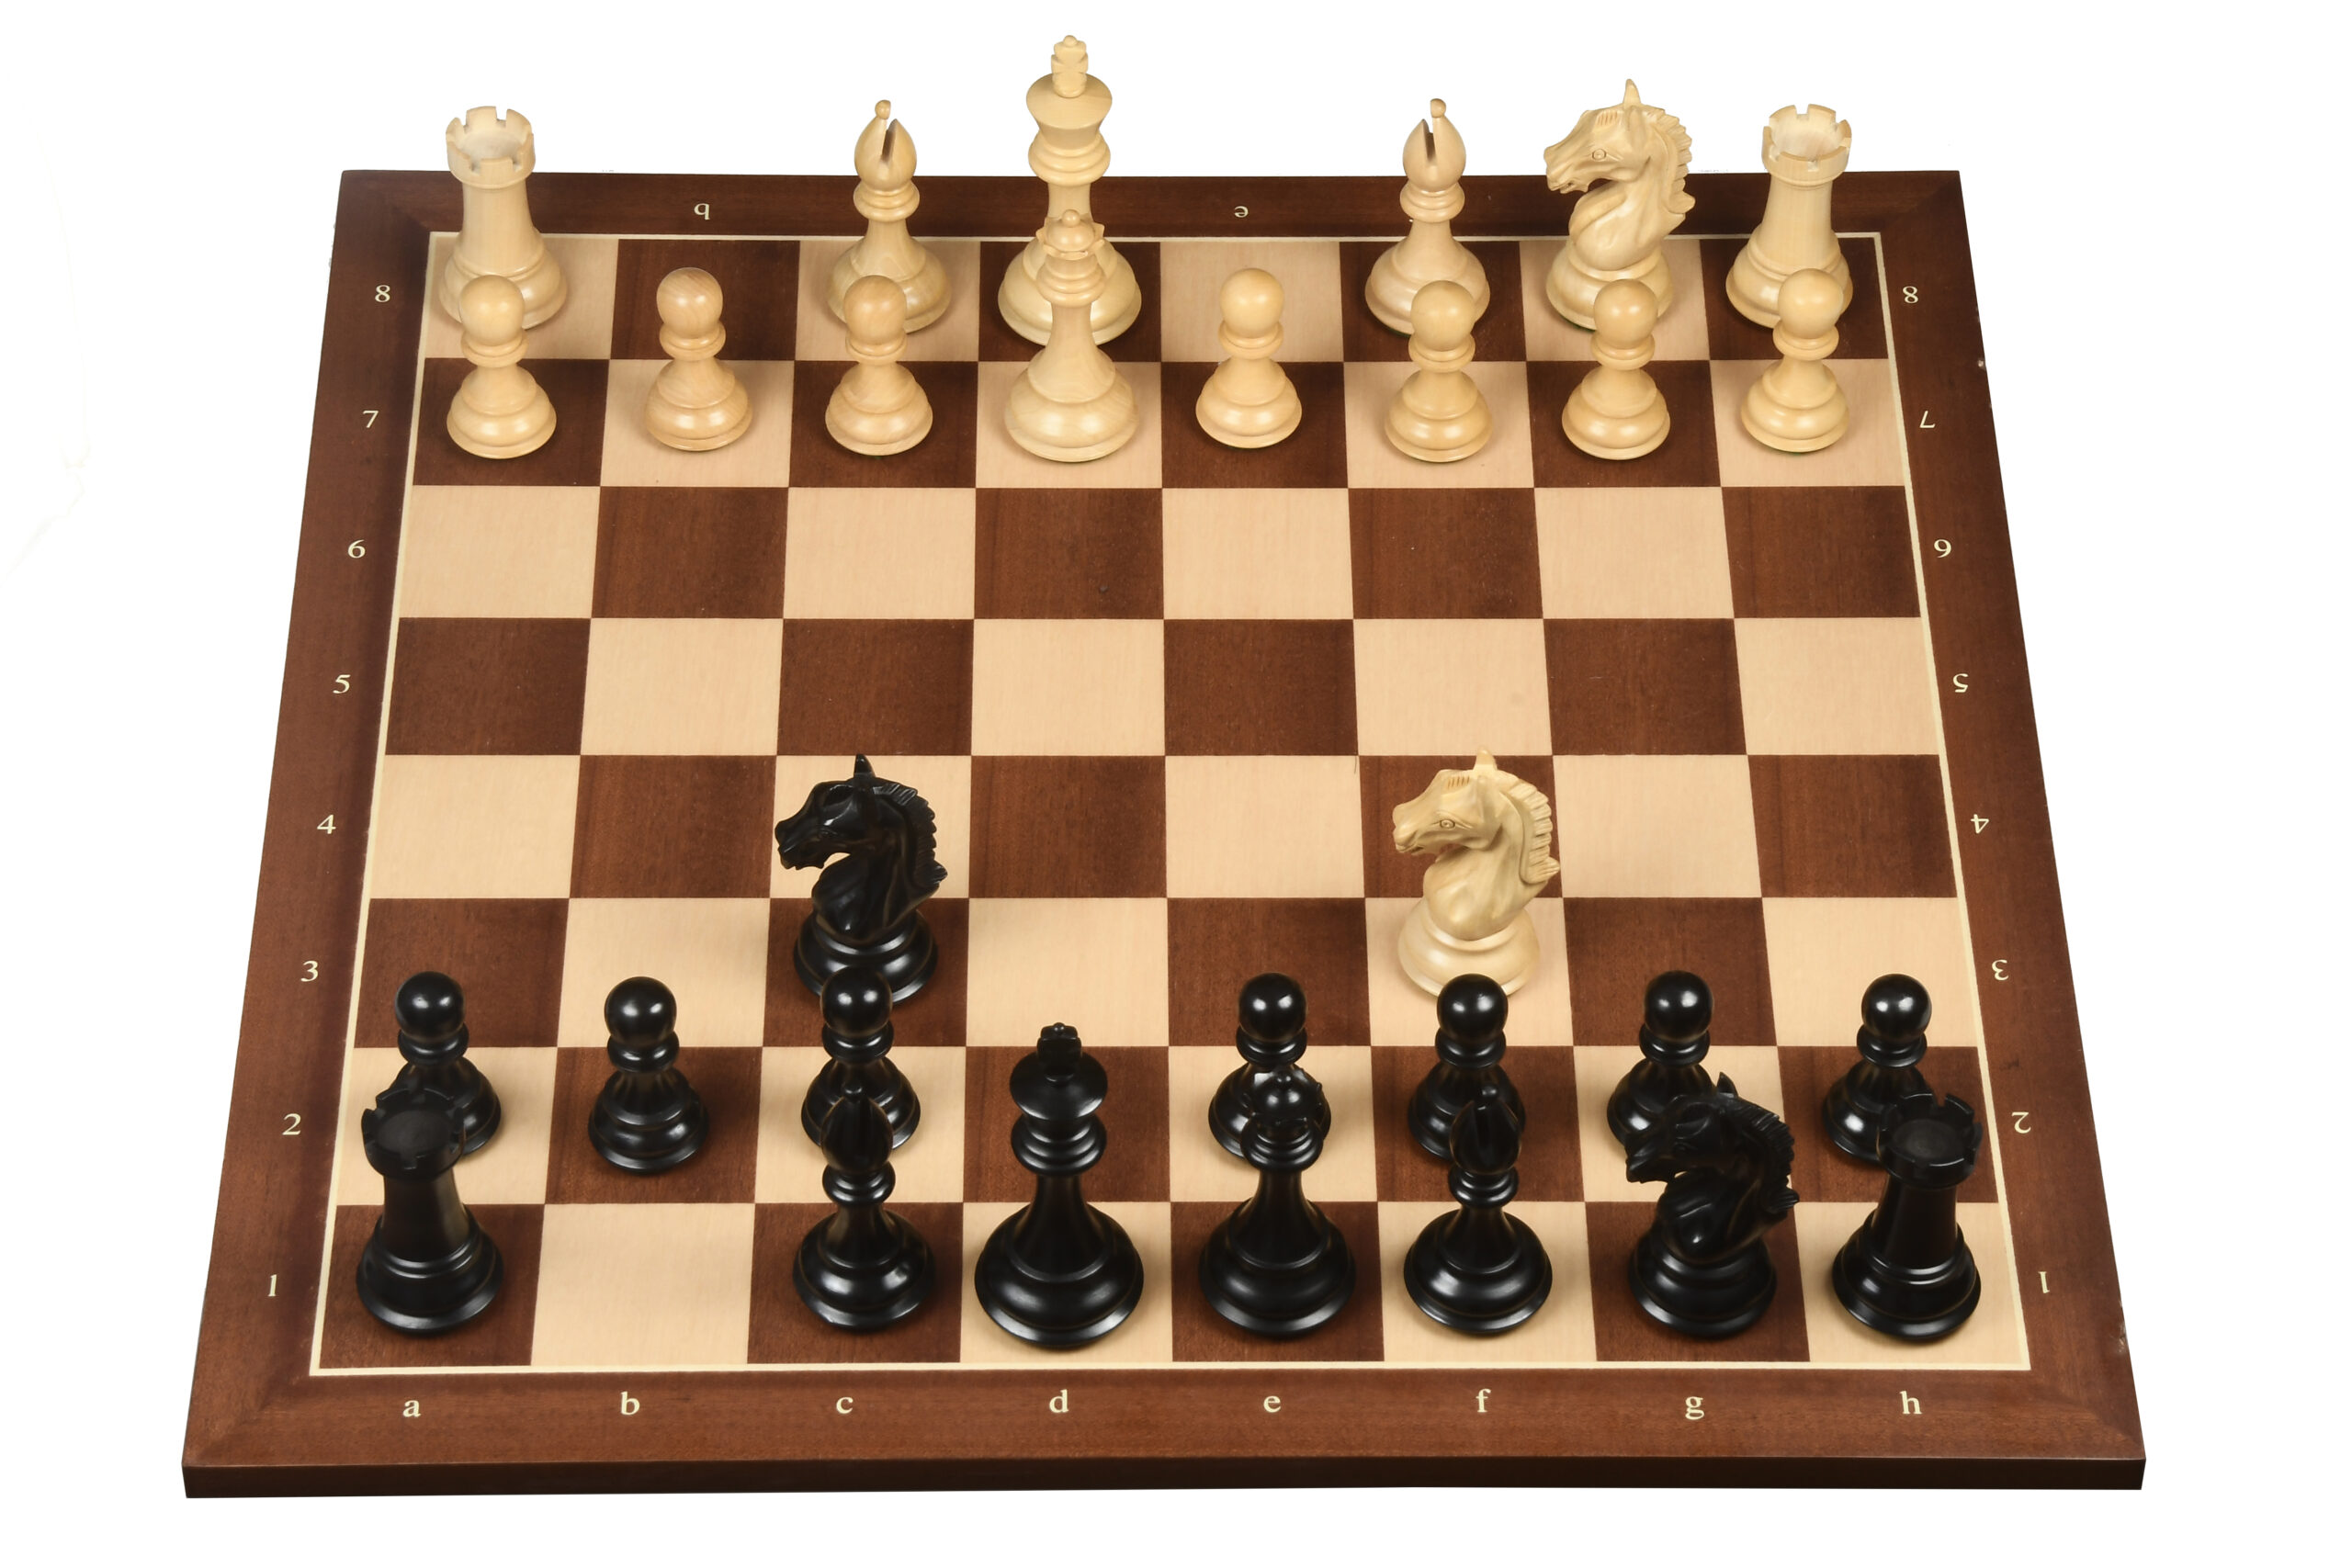 how is chess online for a beginner? : r/chess